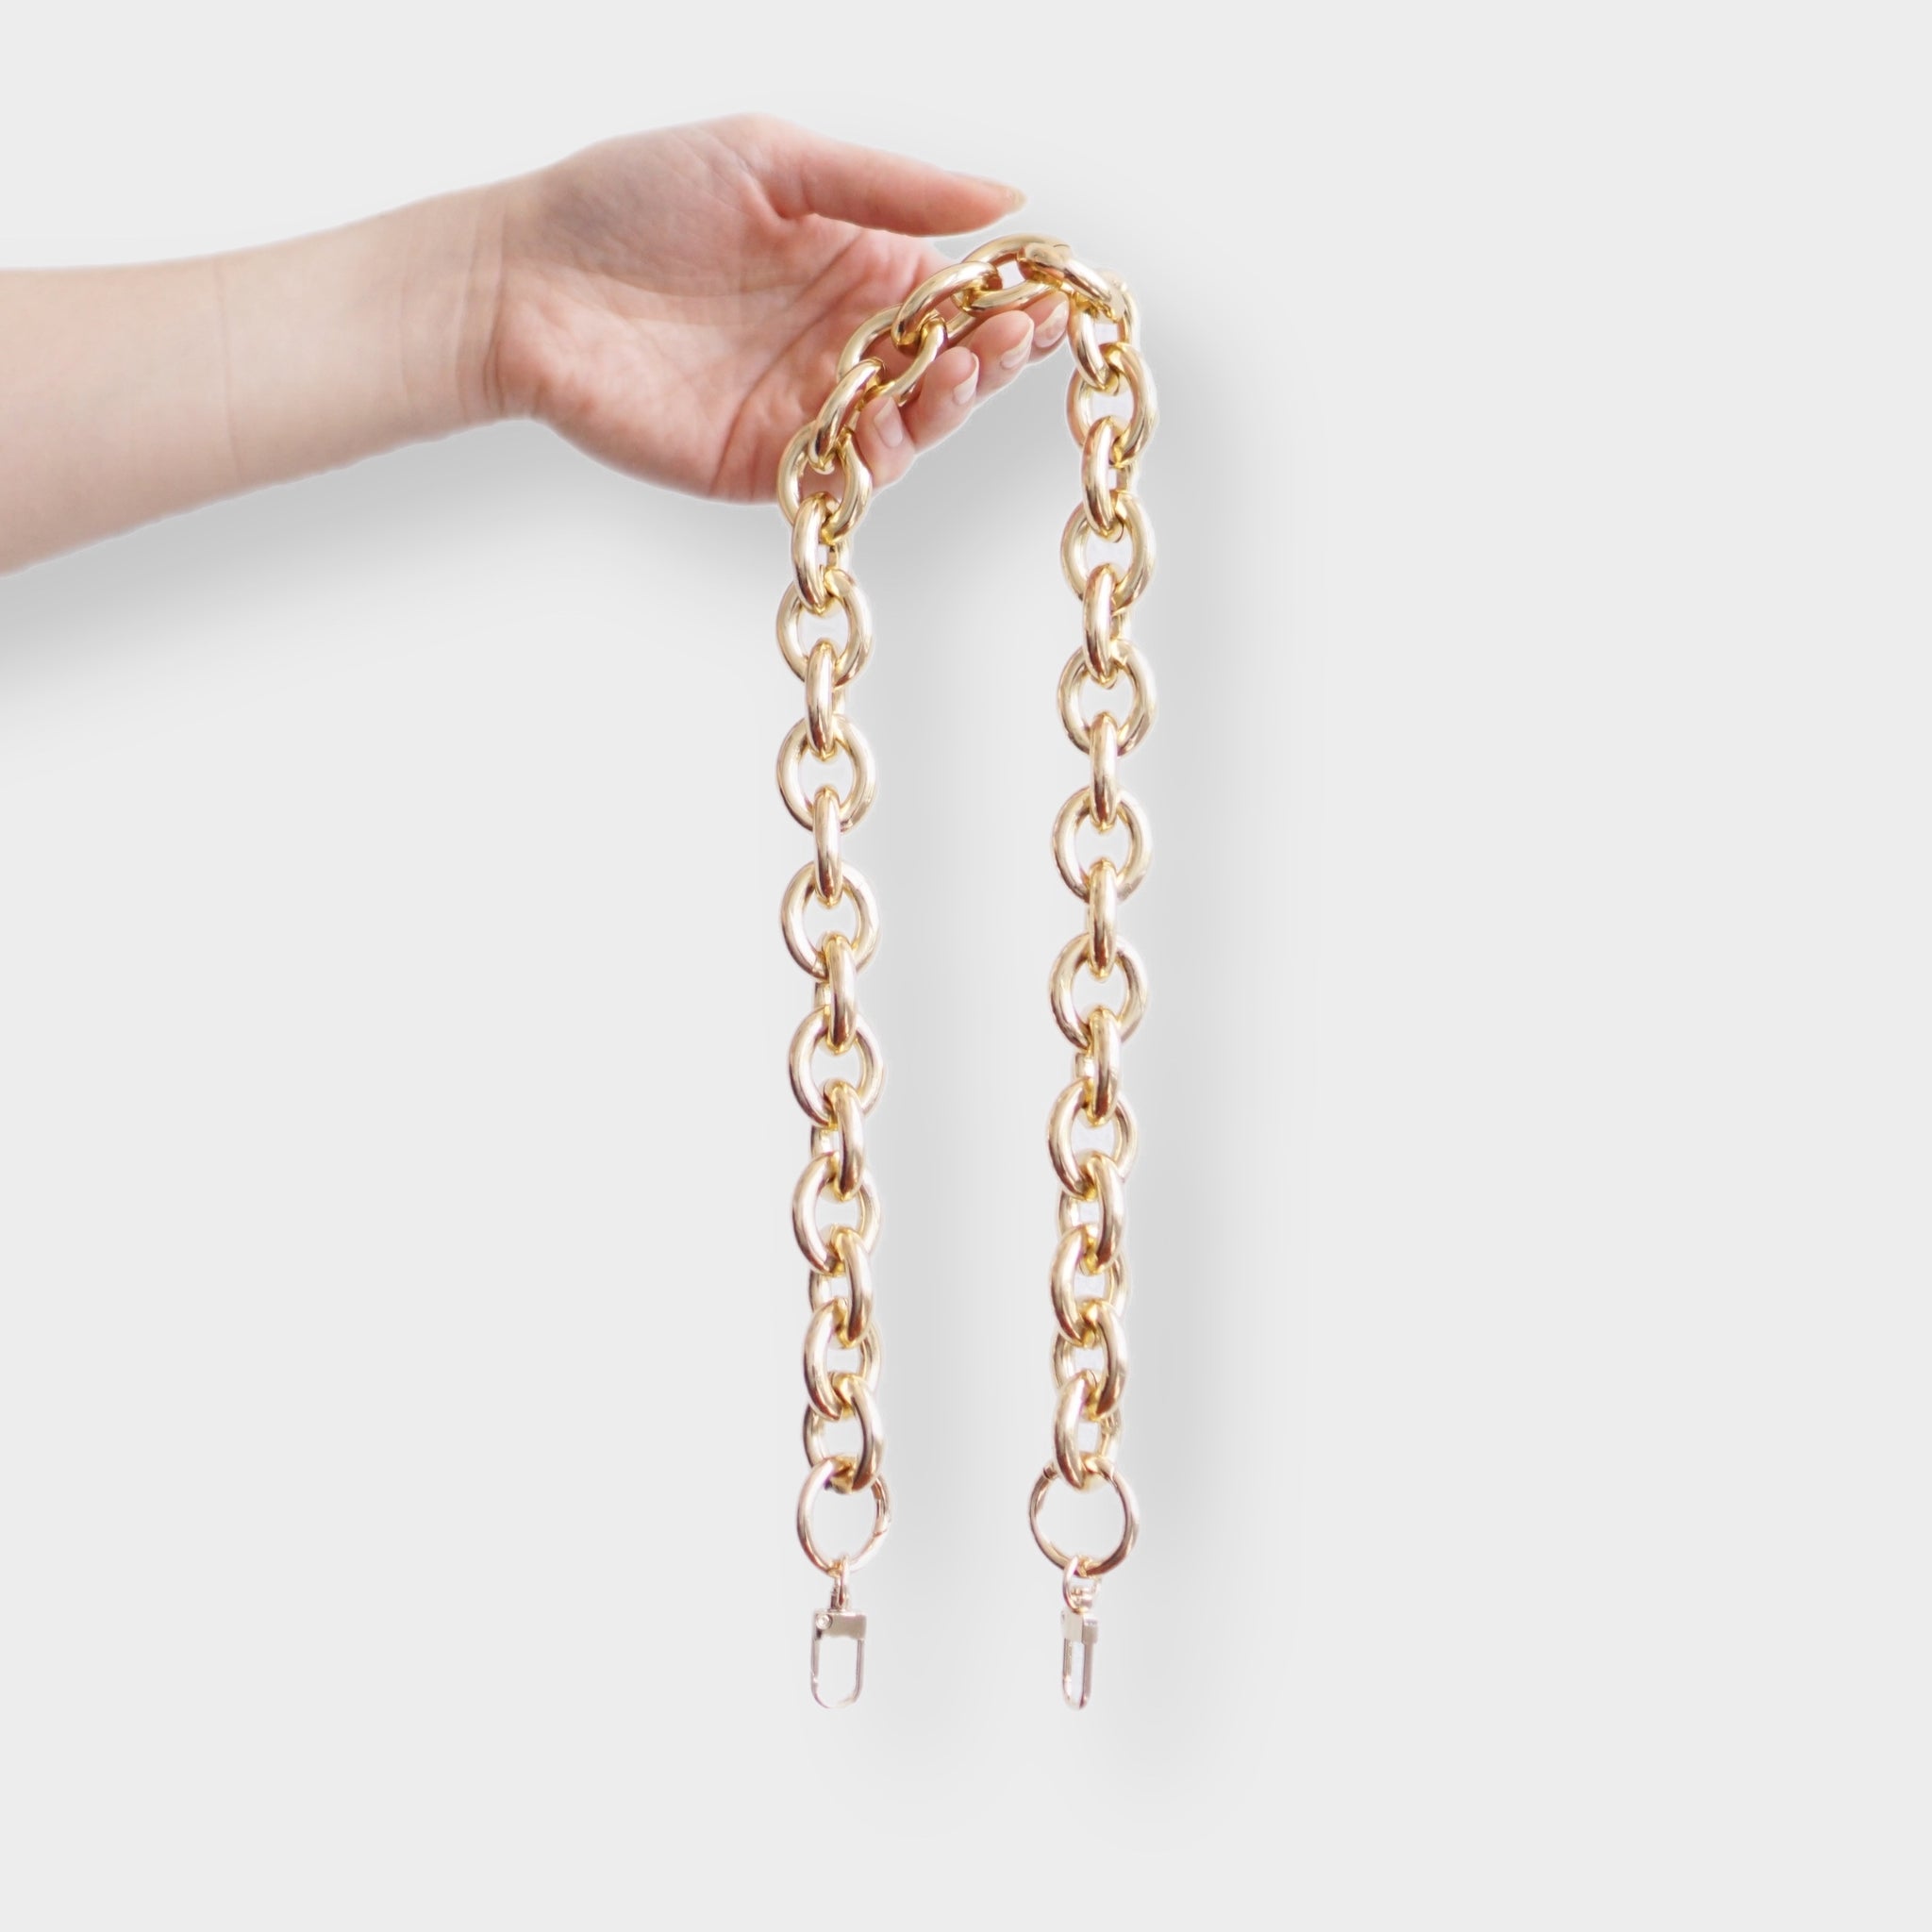 Chunky Oval Gold Chain Bag Strap - For Louis Vuitton, Chanel